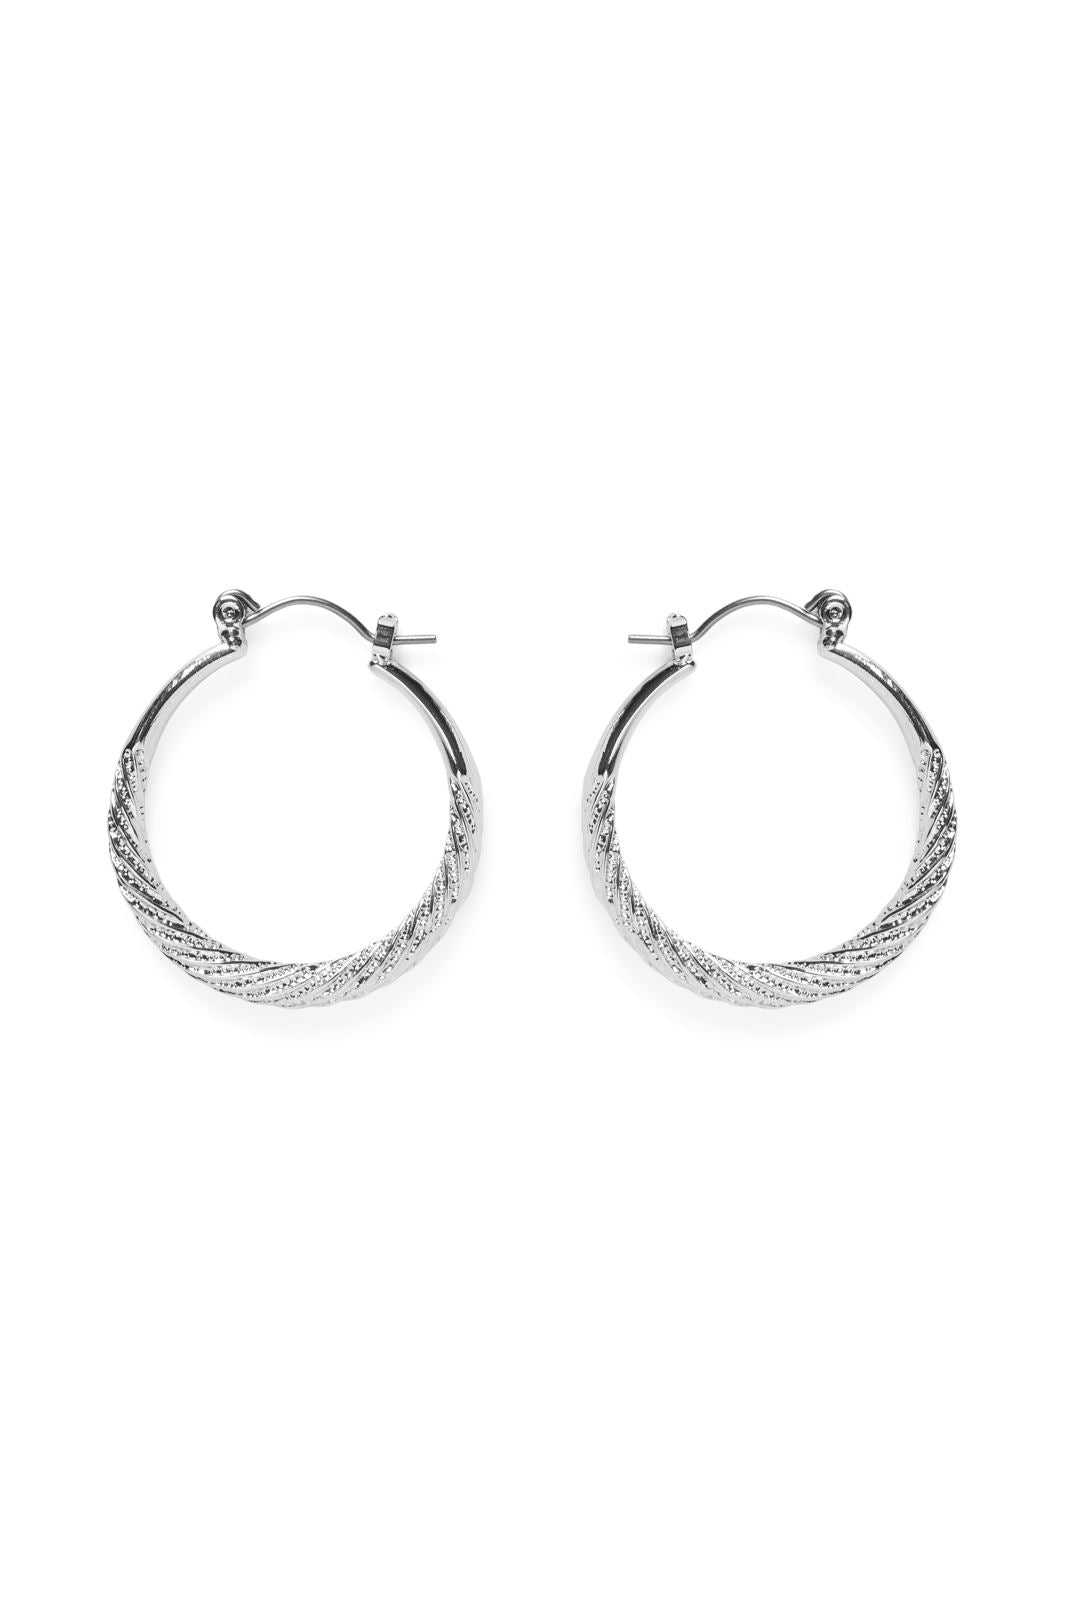 Pieces - Pcmivo Hoop Earrings Box Flow - 4531458 Silver Colour St3